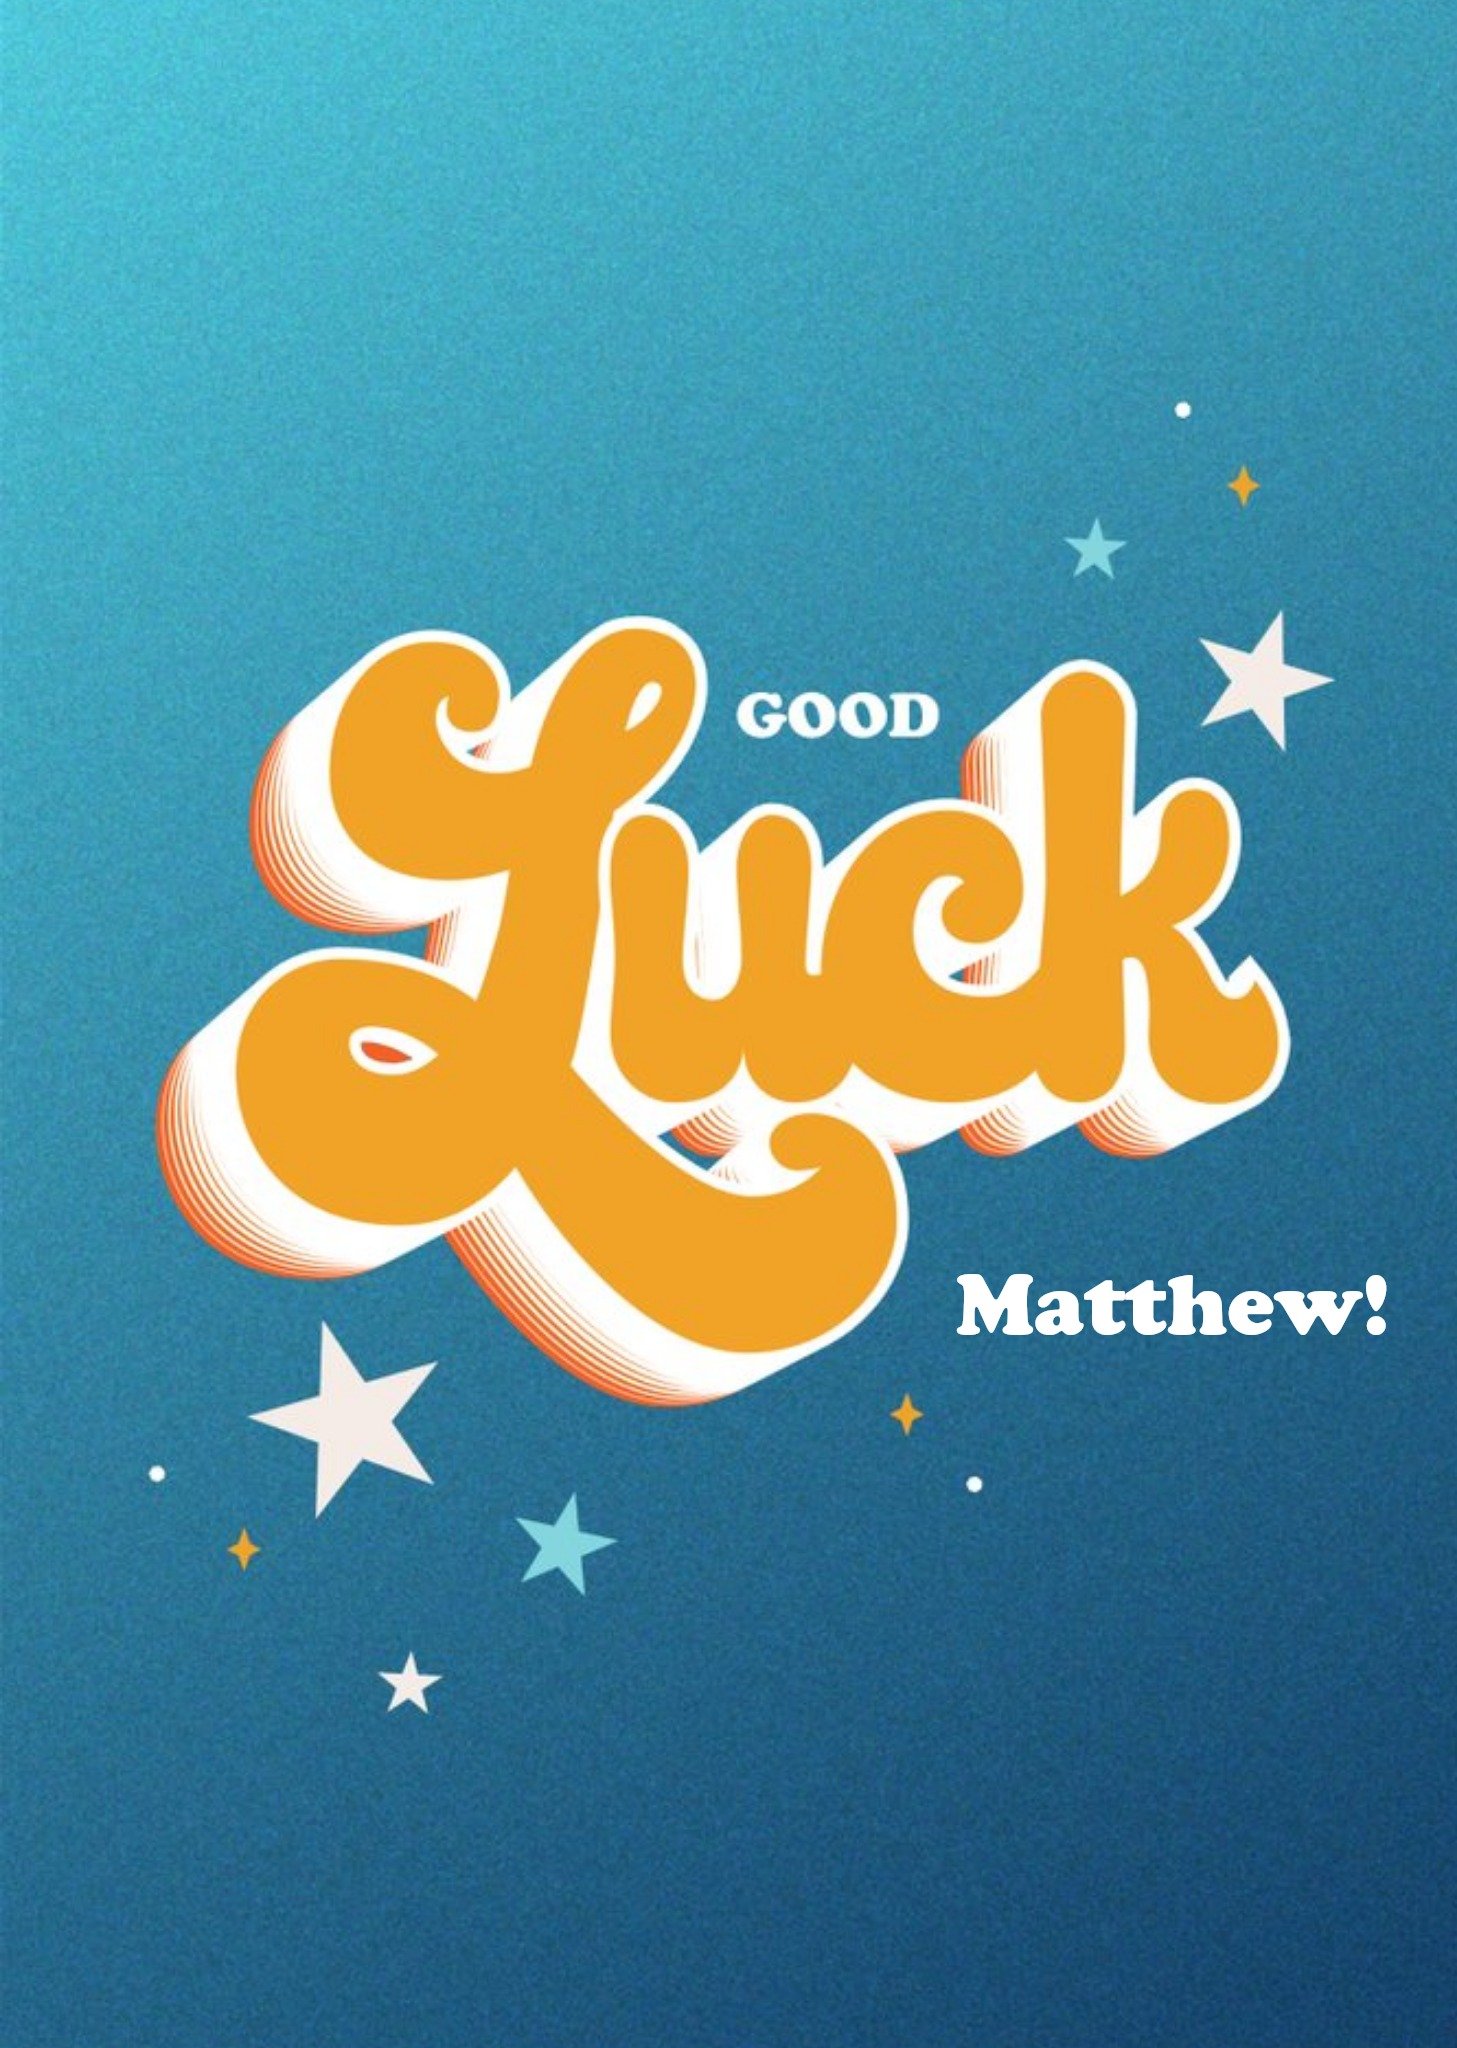 Moonpig Retro 3D Typography Surrounded By Stars On A Blue Gradient Background Good Luck Card, Large